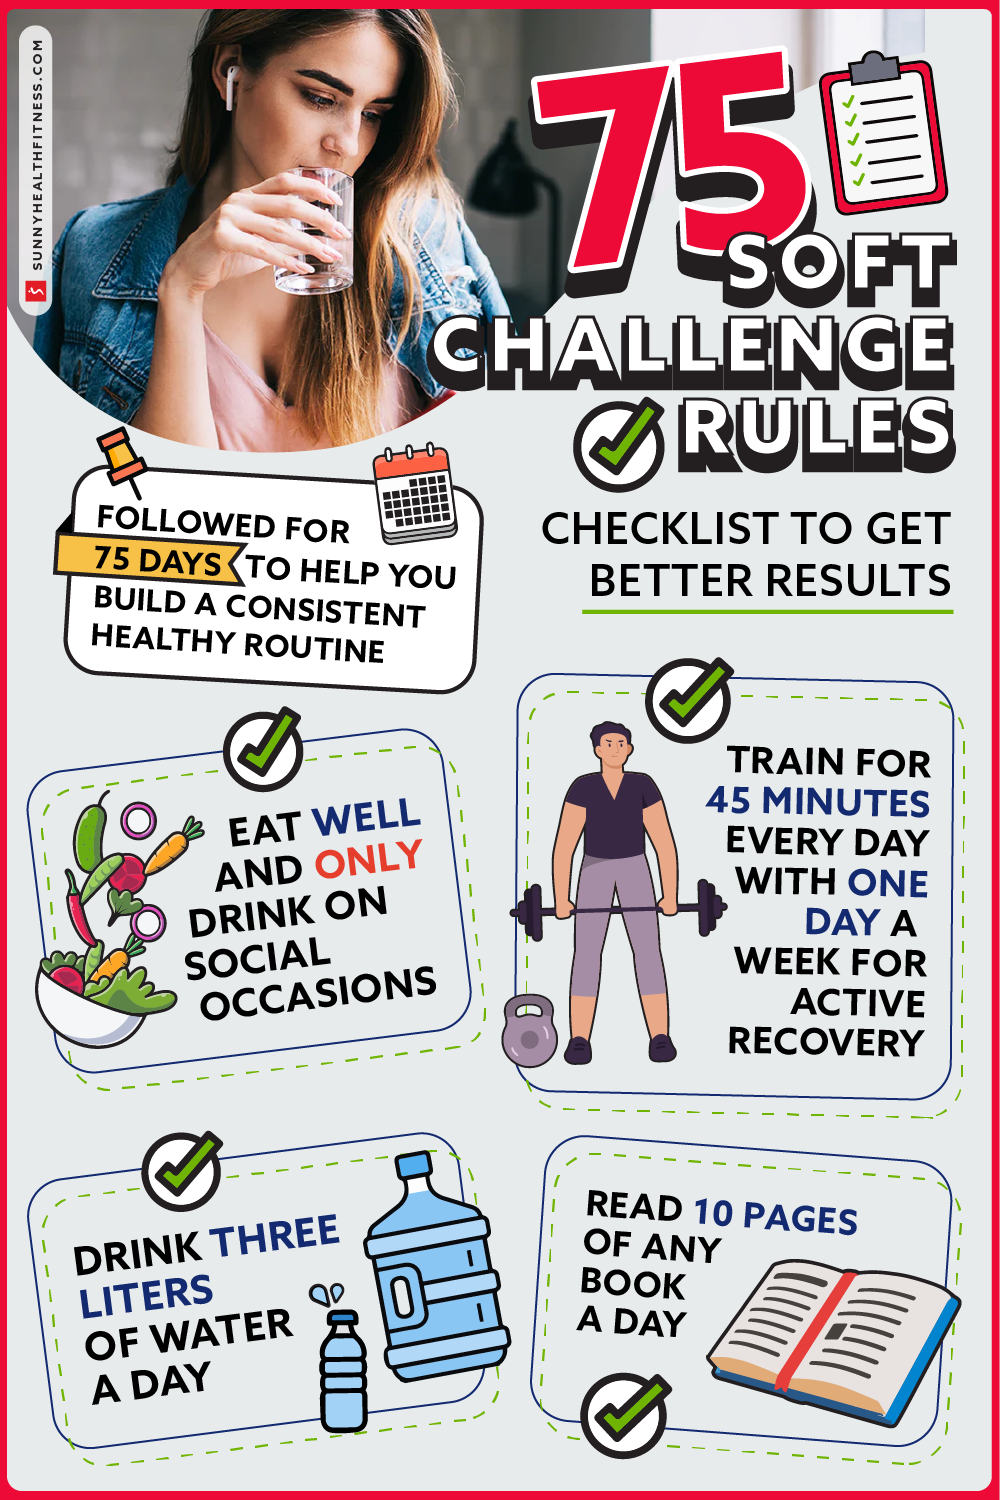 75 Soft Challenge Rules Checklist to Get Better Results Infographics